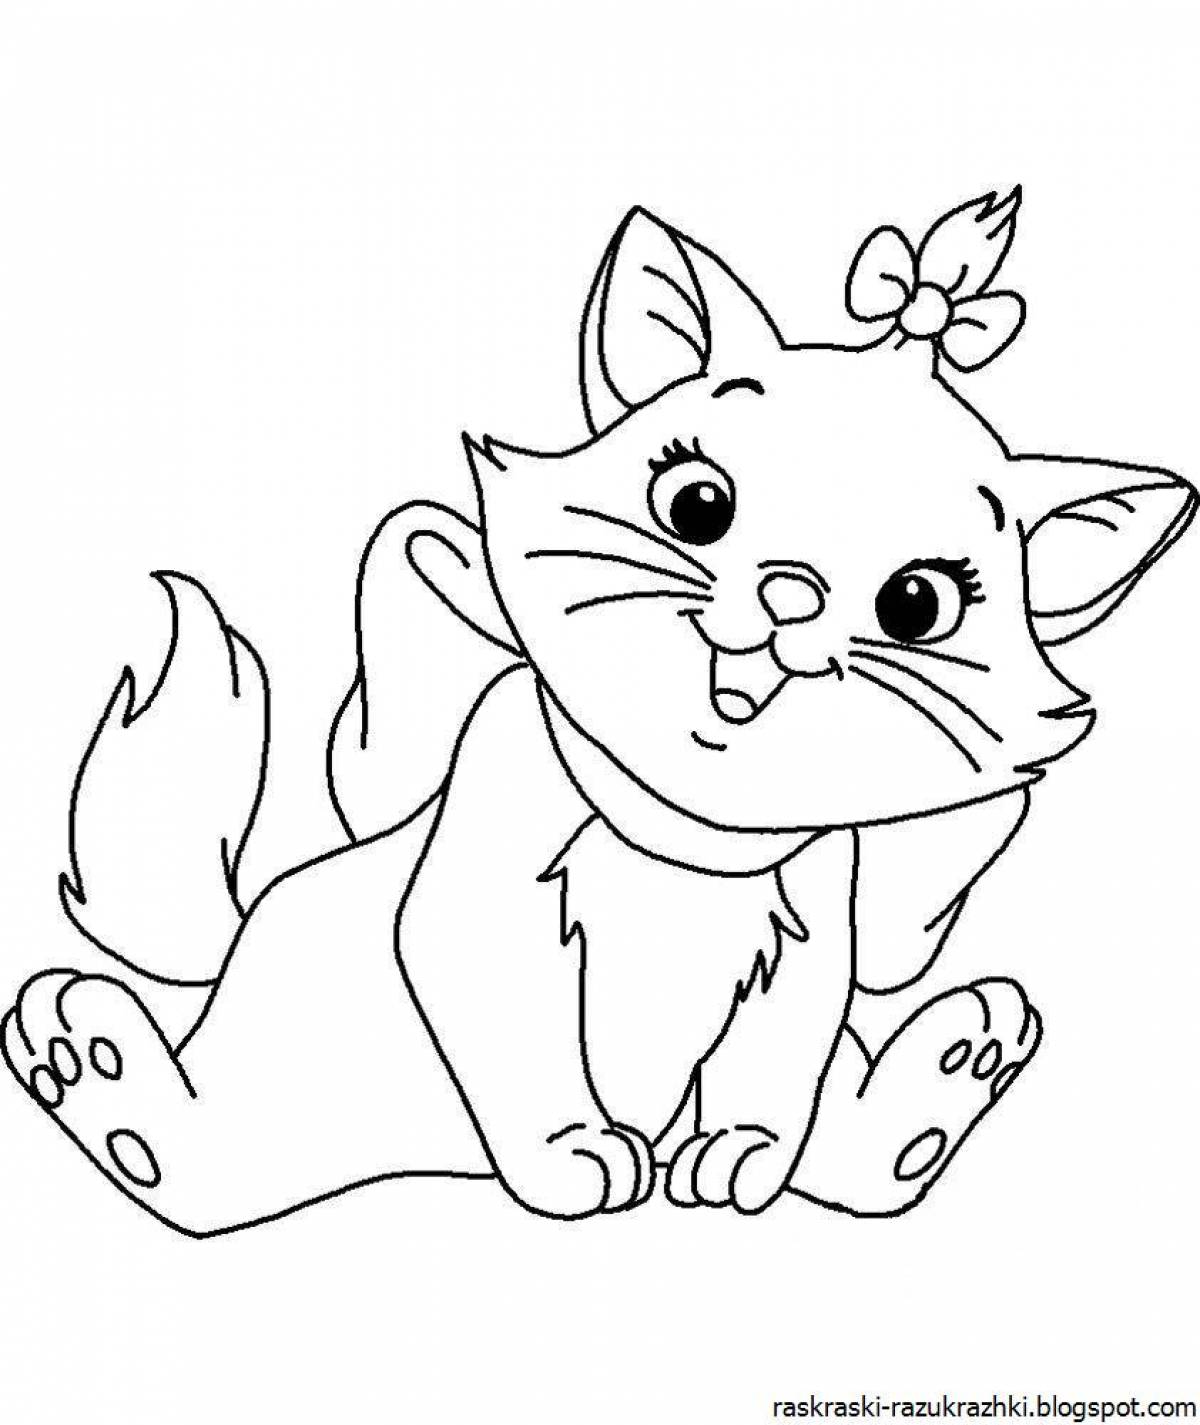 Colourful coloring cat for children 3-4 years old